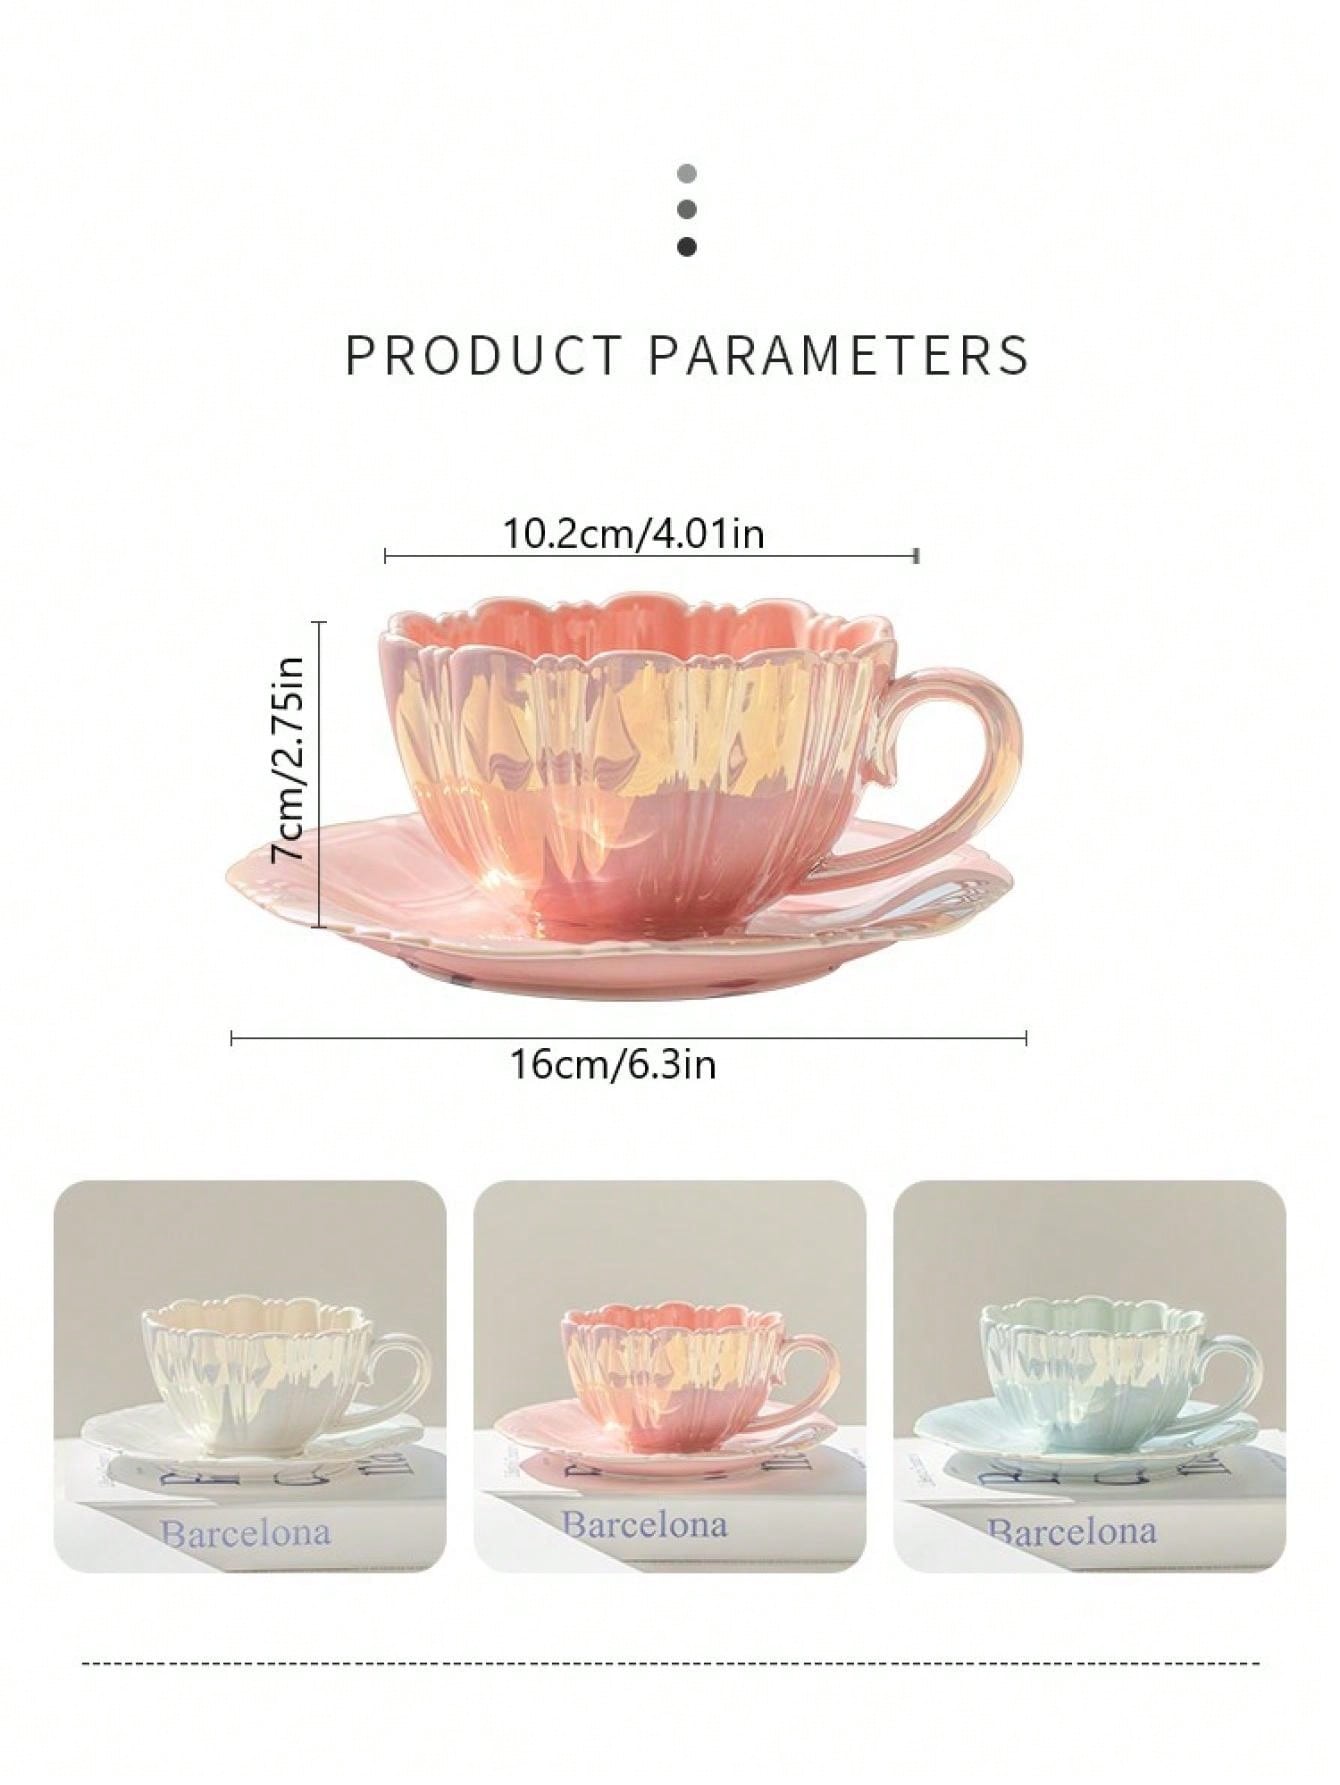 1Set 260Ml Ceramic Coffee Cup & Saucer Set with Petals Design, High Value Gift for Couple, Women, Home Use